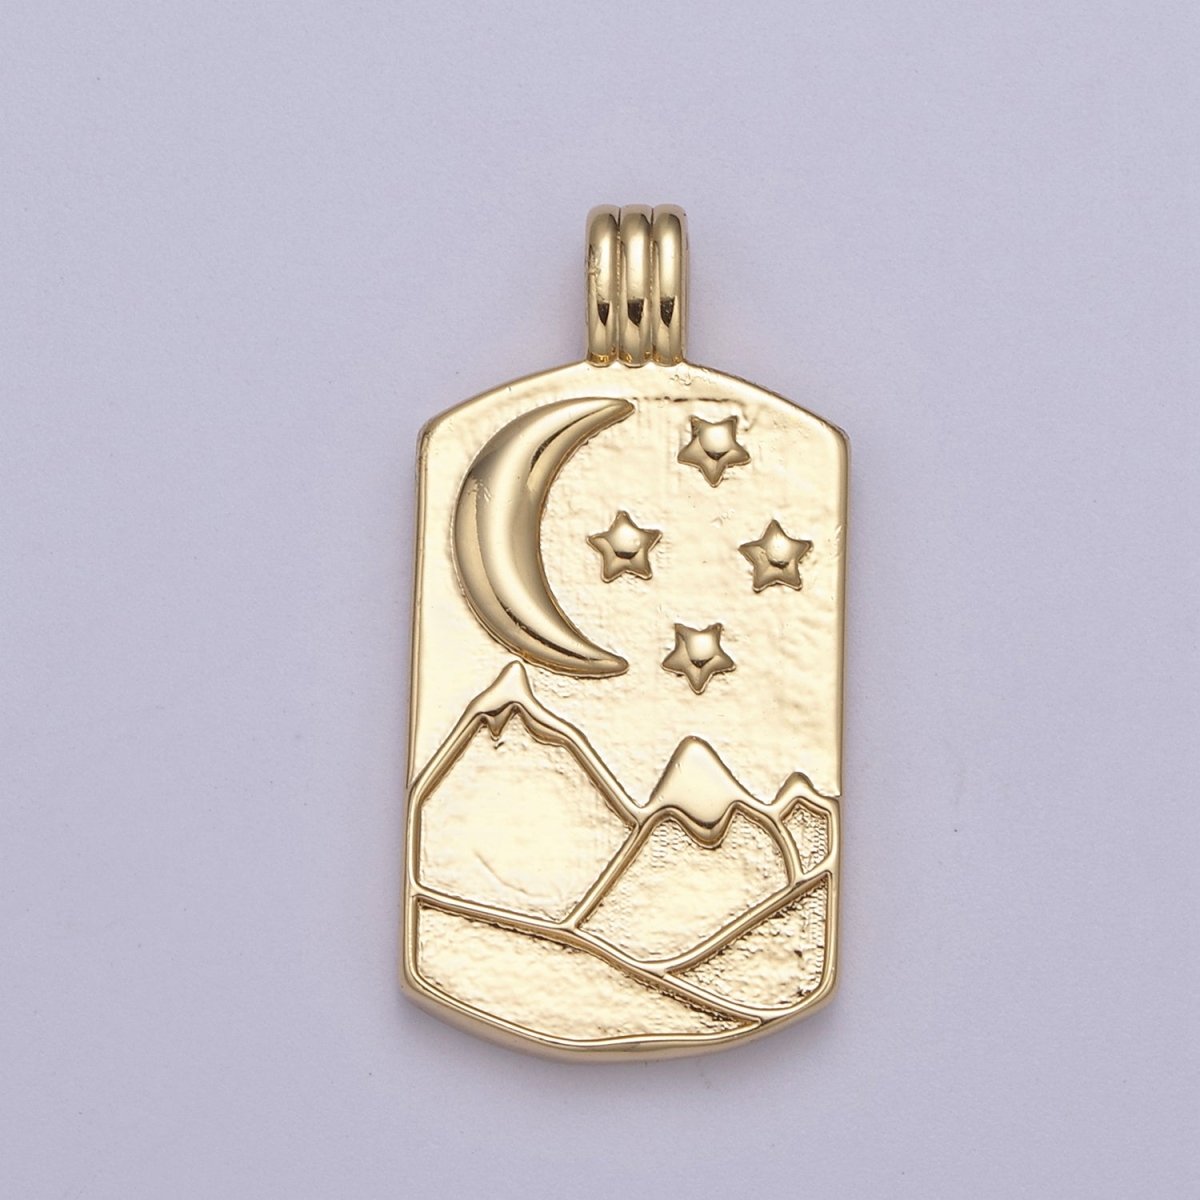 New Element Tag Collection Gold Element Charm Fire Wind Earth Ocean Wave Charm 14K Gold Filled Medallion for Necklace Supply H-519 H-521 H-522 H-524 - DLUXCA